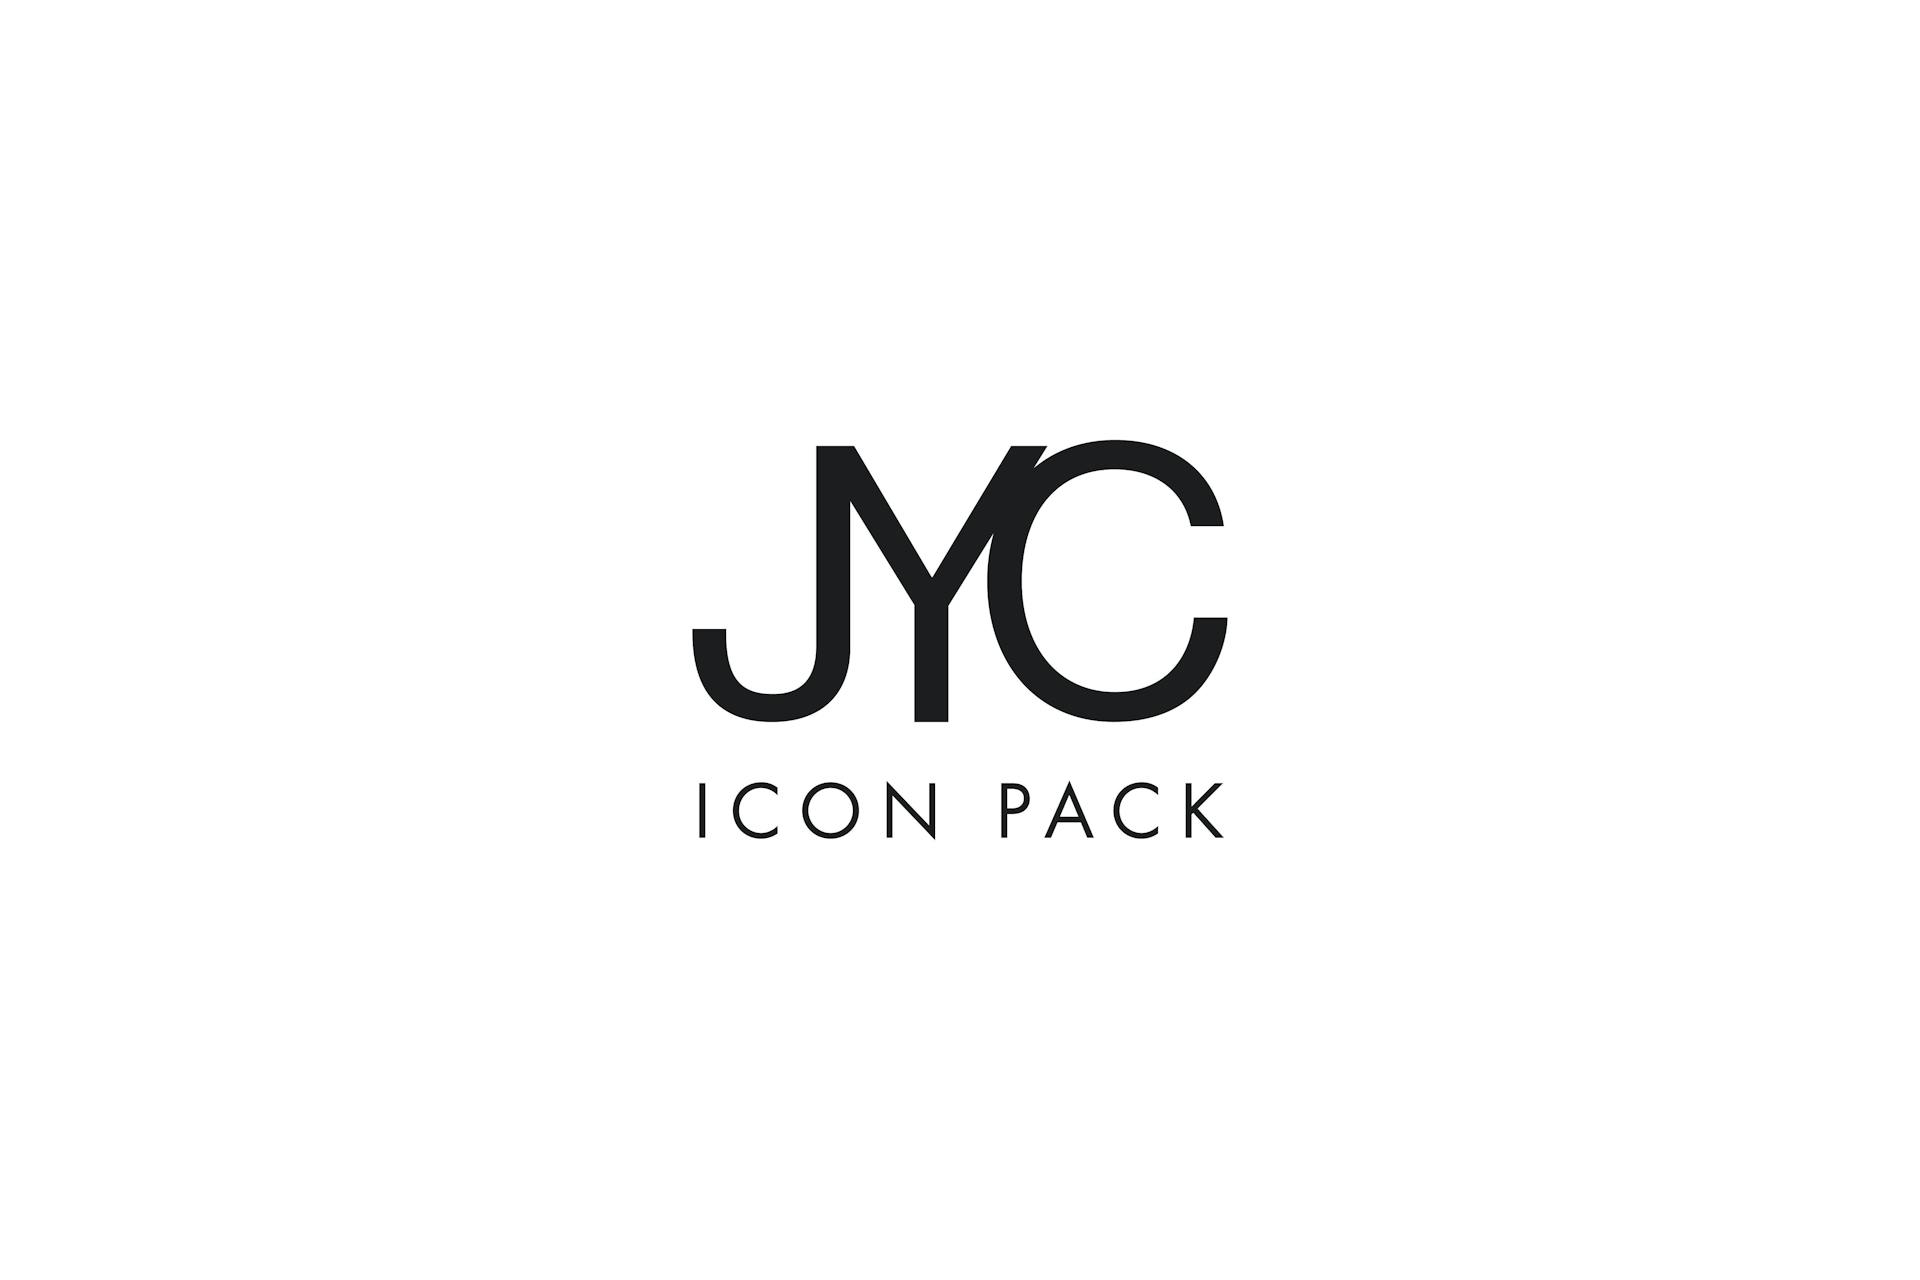 Icon Pack - JYC